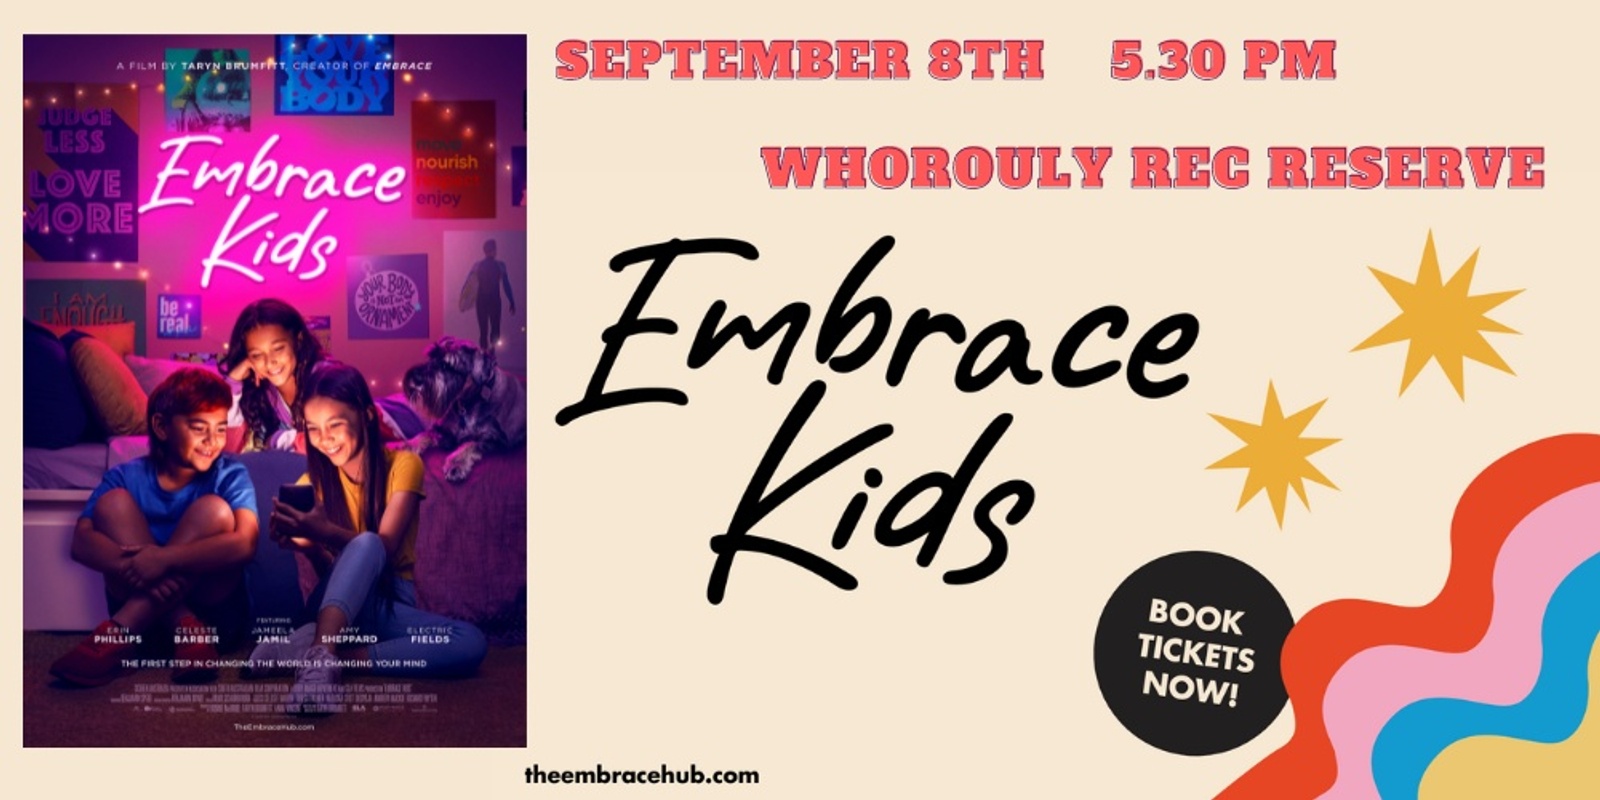 Banner image for Embrace Kids Movie: Whorouly Rec Reserve